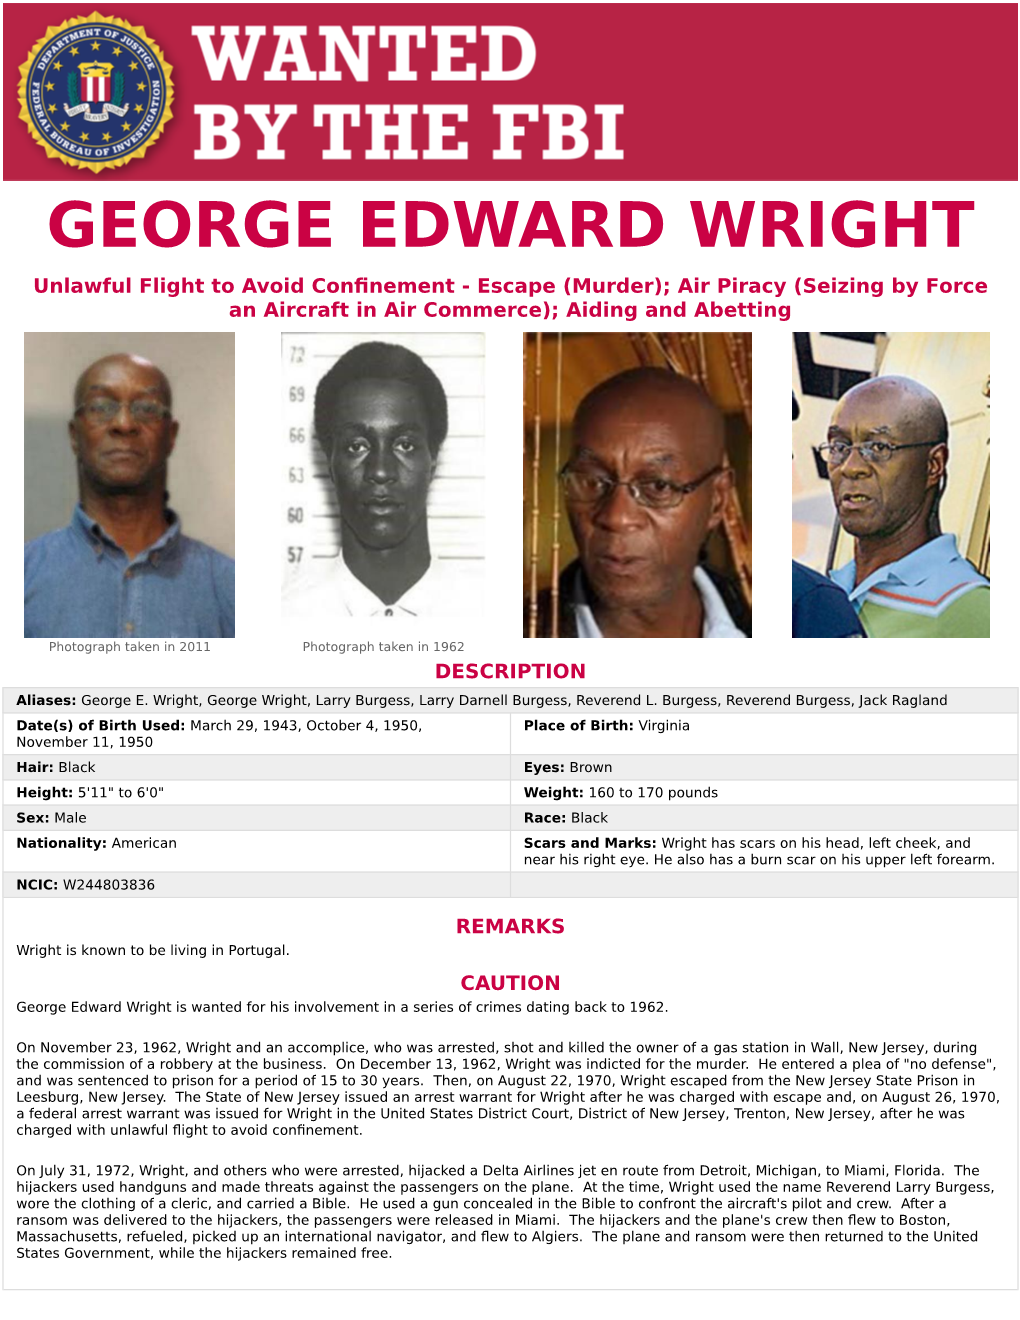 GEORGE EDWARD WRIGHT Unlawful Flight to Avoid Confinement - Escape (Murder); Air Piracy (Seizing by Orcef an Aircraft in Air Commerce); Aiding and Abetting